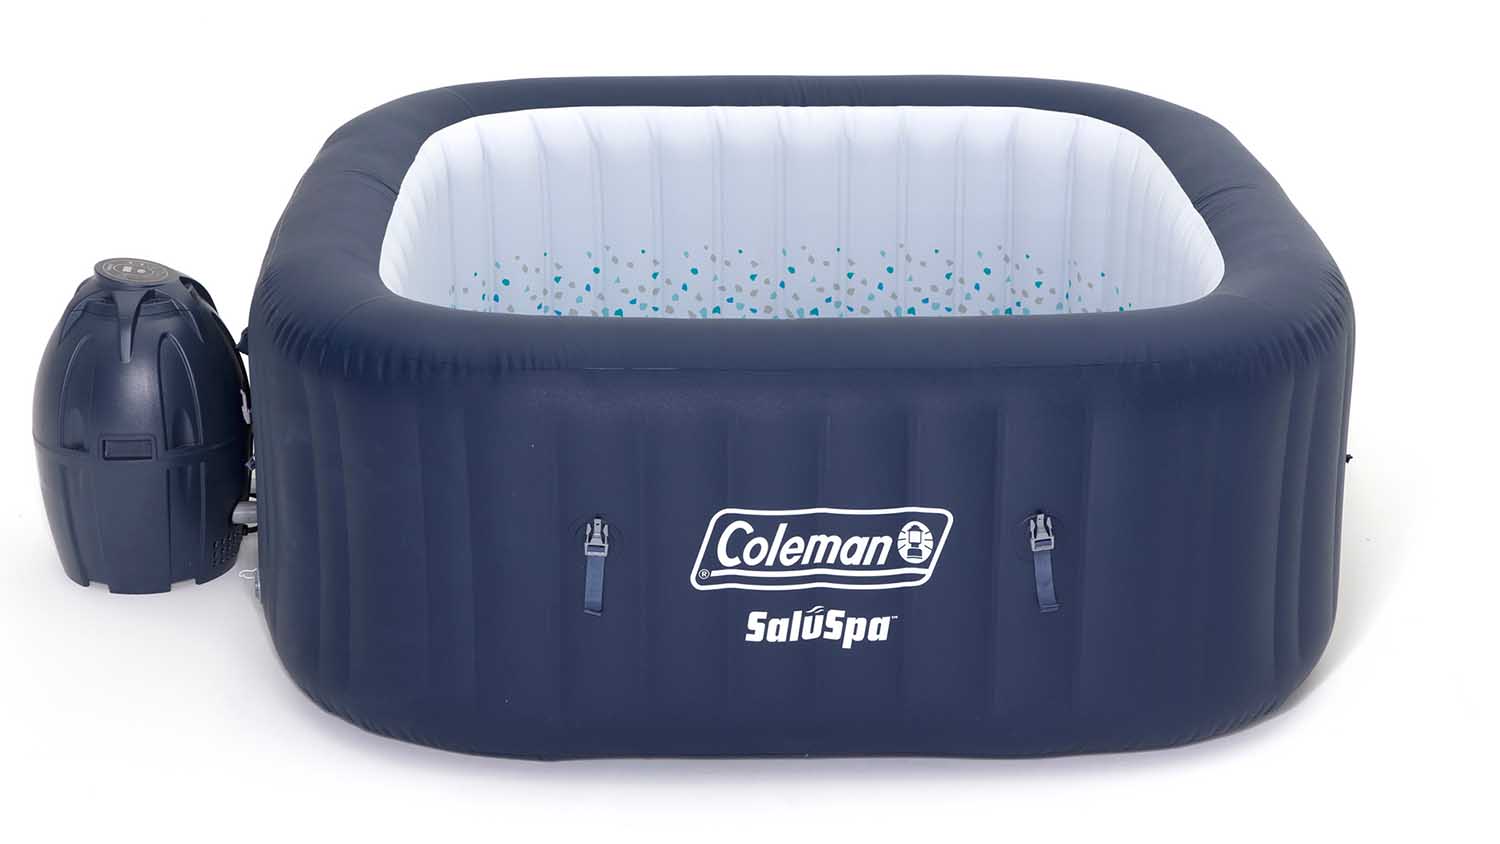 coleman inflatable hot tub